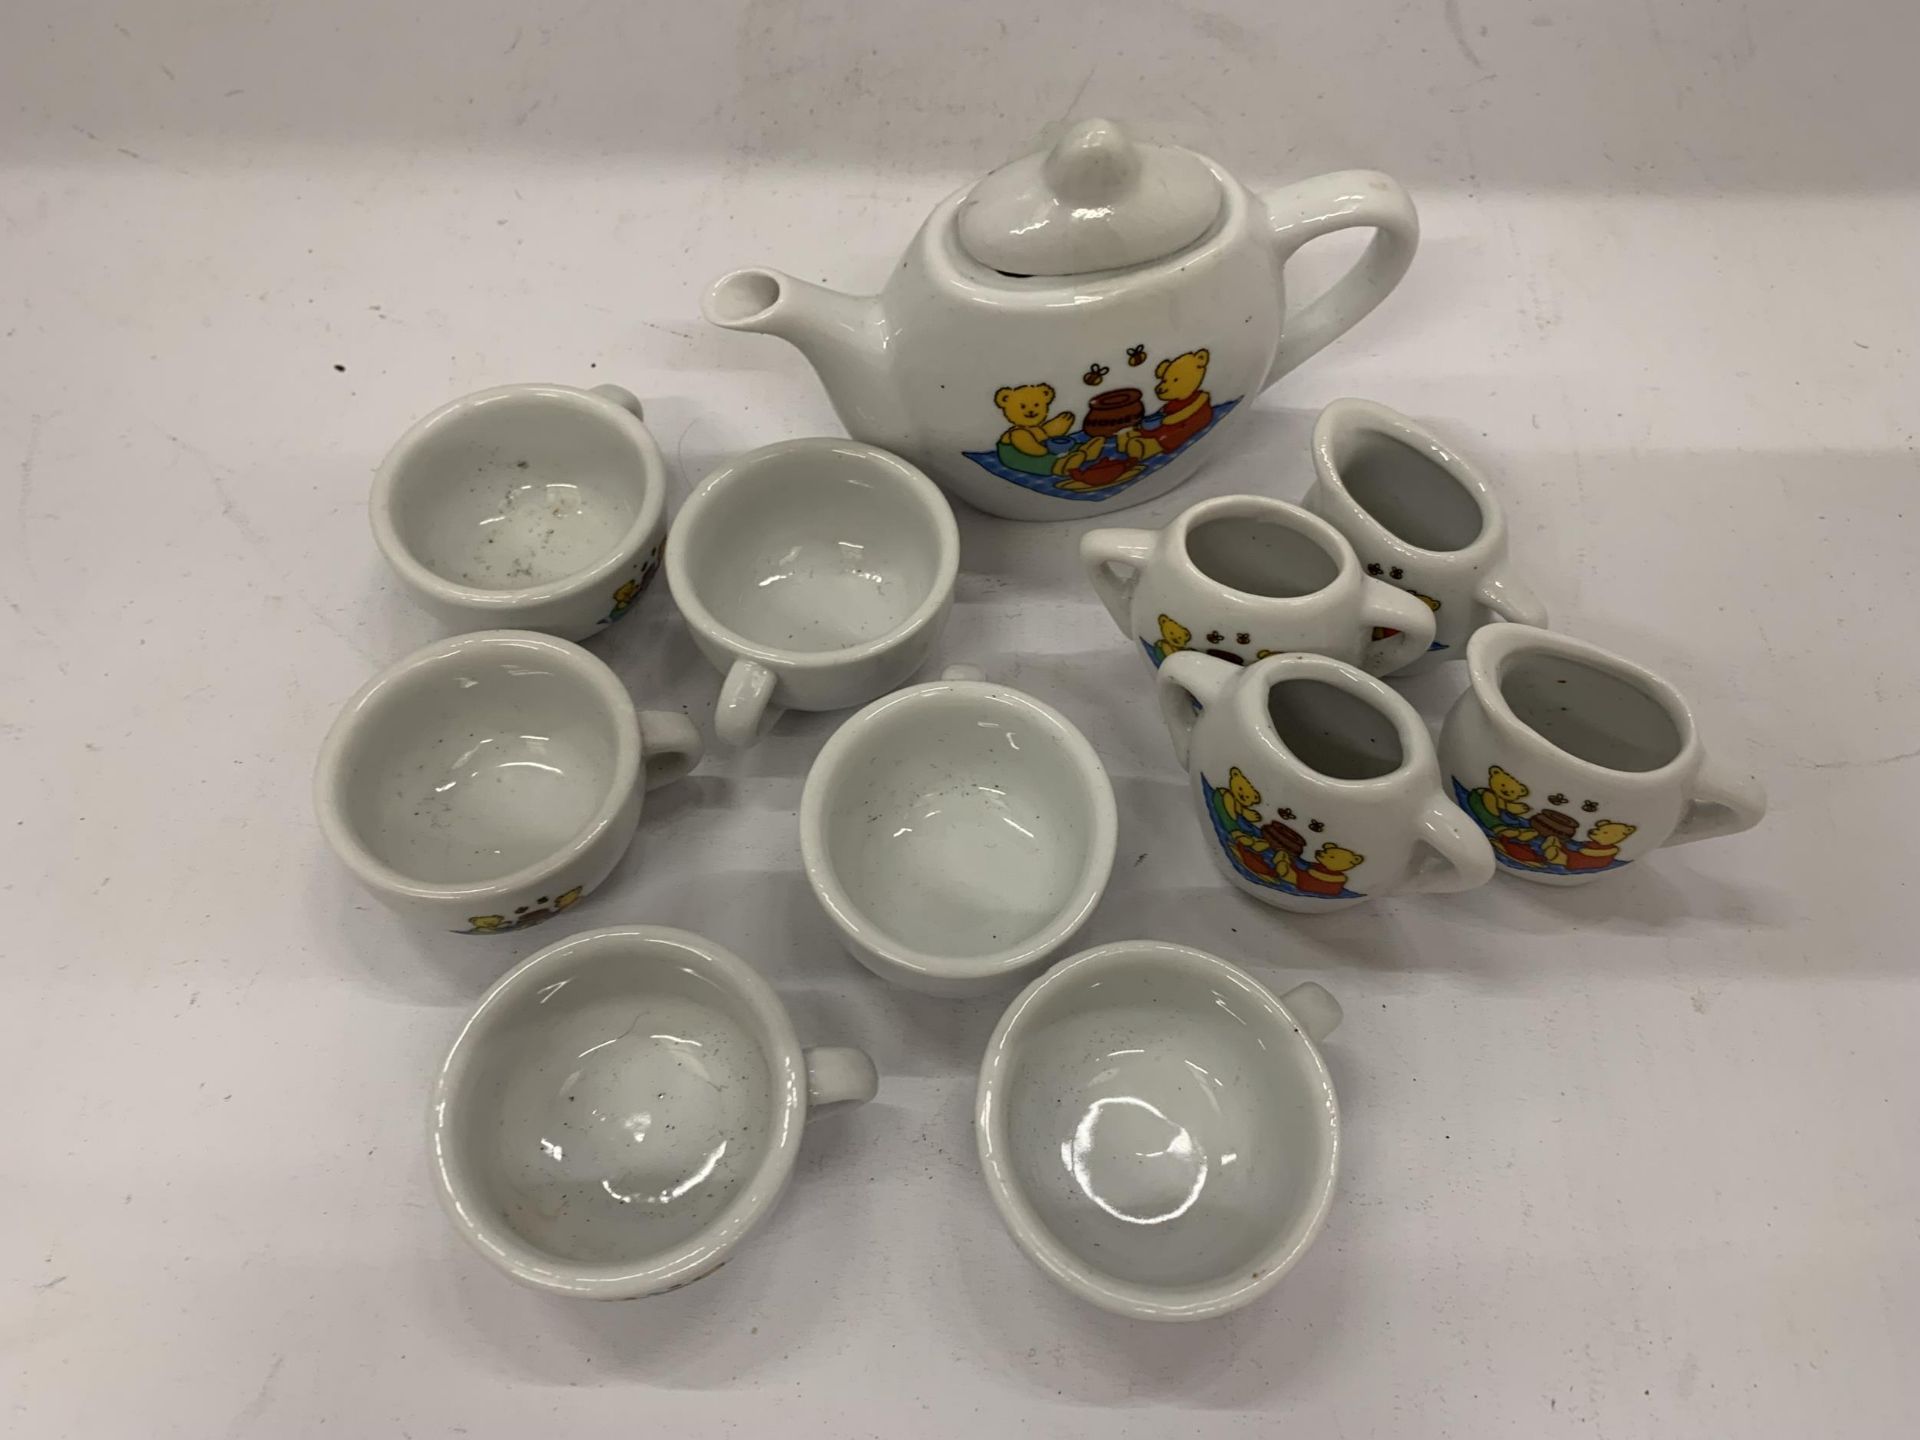 A MINIATURE CHILD'S POTTERY TEASET TO INCLUDE TEAPOT, JUGS, CUPS, ETC WITH A TEDDY BEARS PICNIC - Image 3 of 10